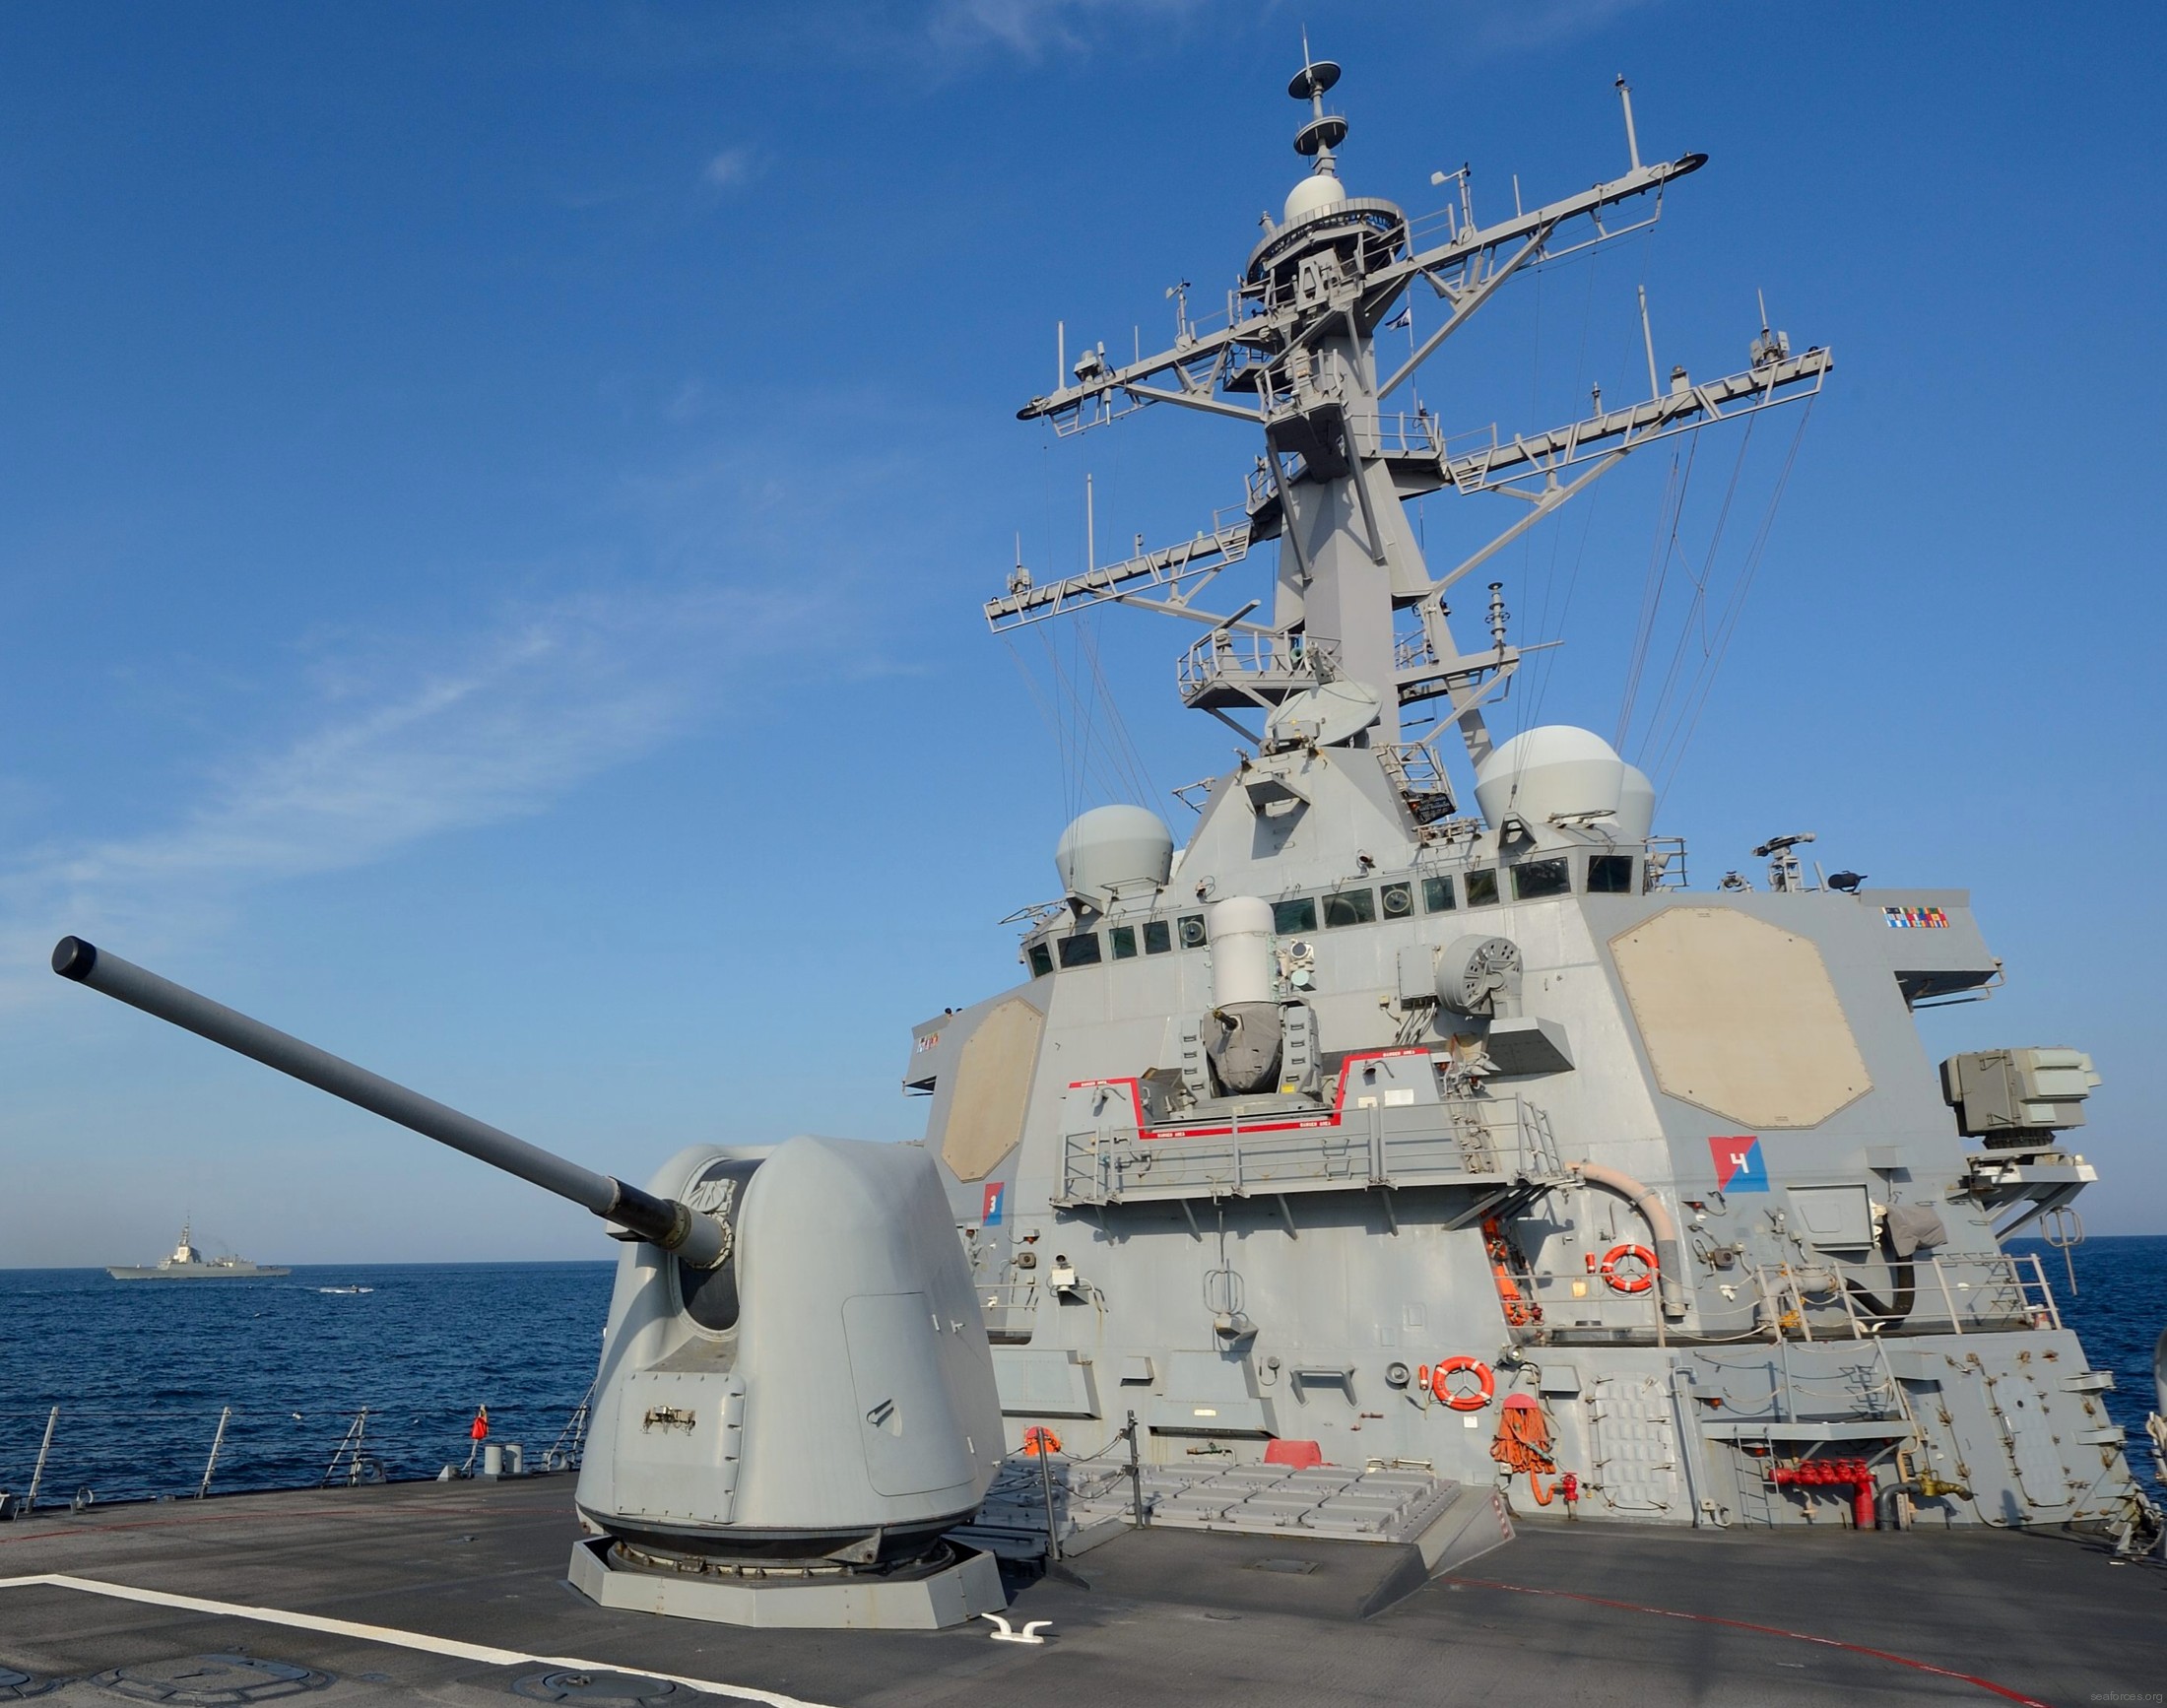 ddg-71 uss ross guided missile destroyer arleigh burke class aegis bmd 64